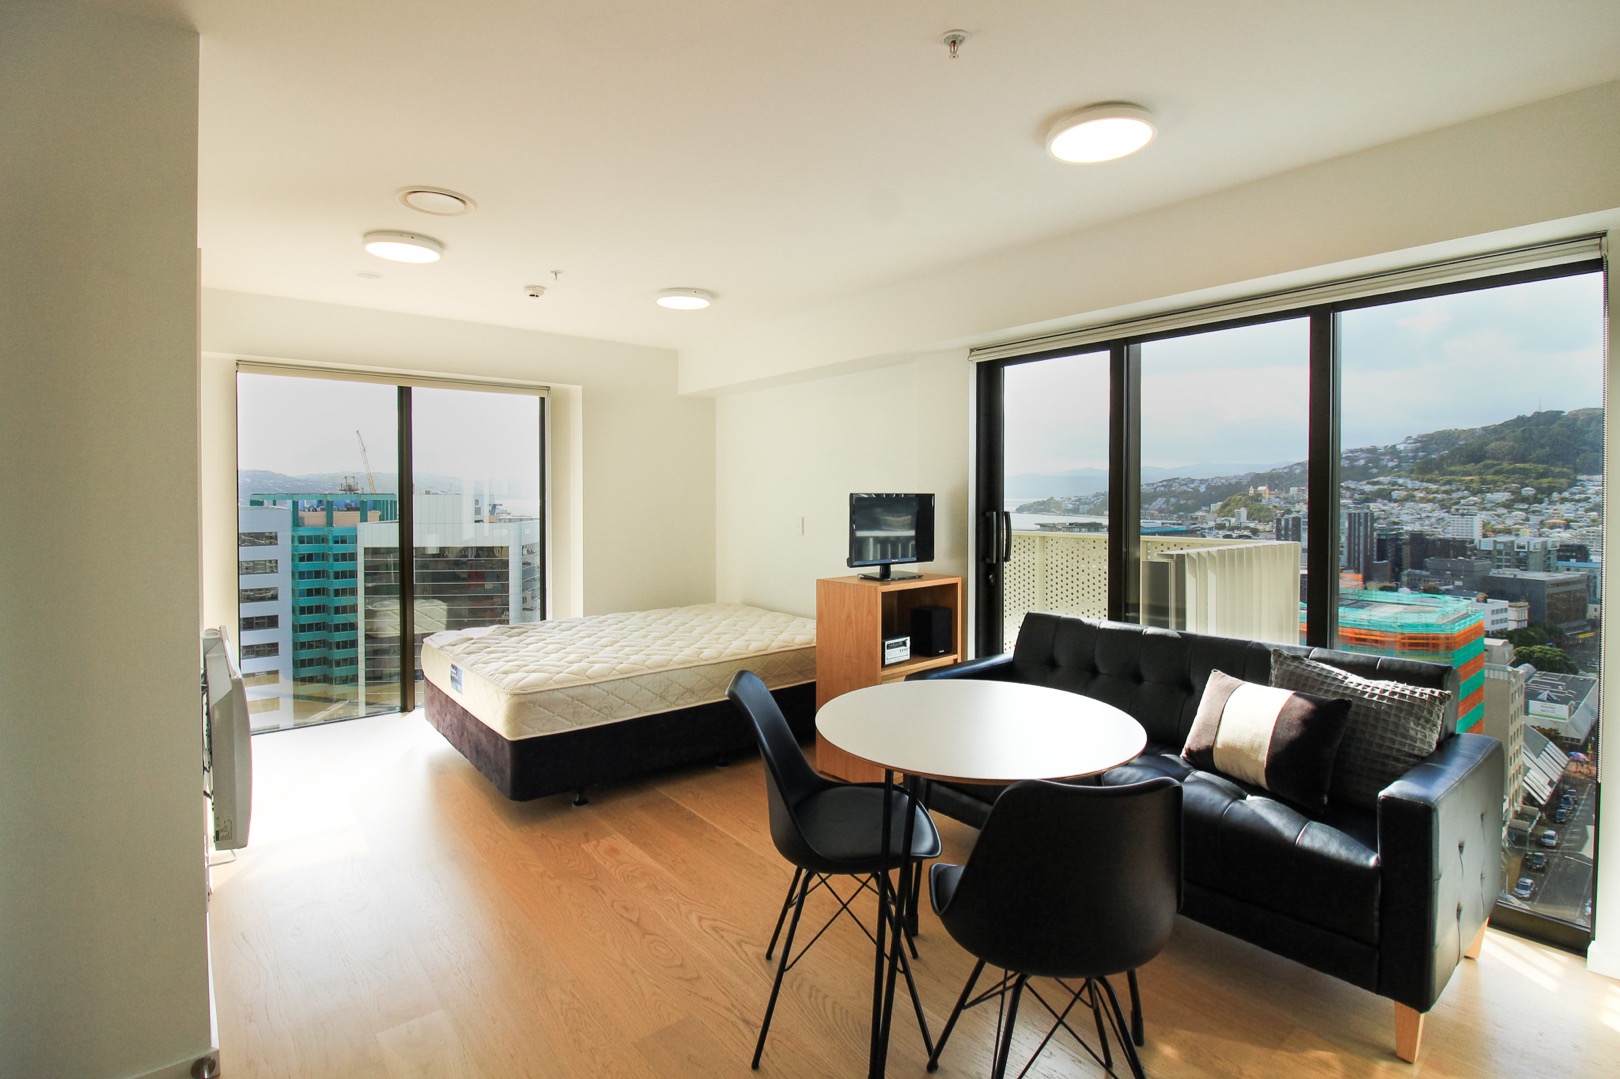 Real Estate For Rent Houses & Apartments : Brand New Modern Studio Apartment with Balcony, Wellington